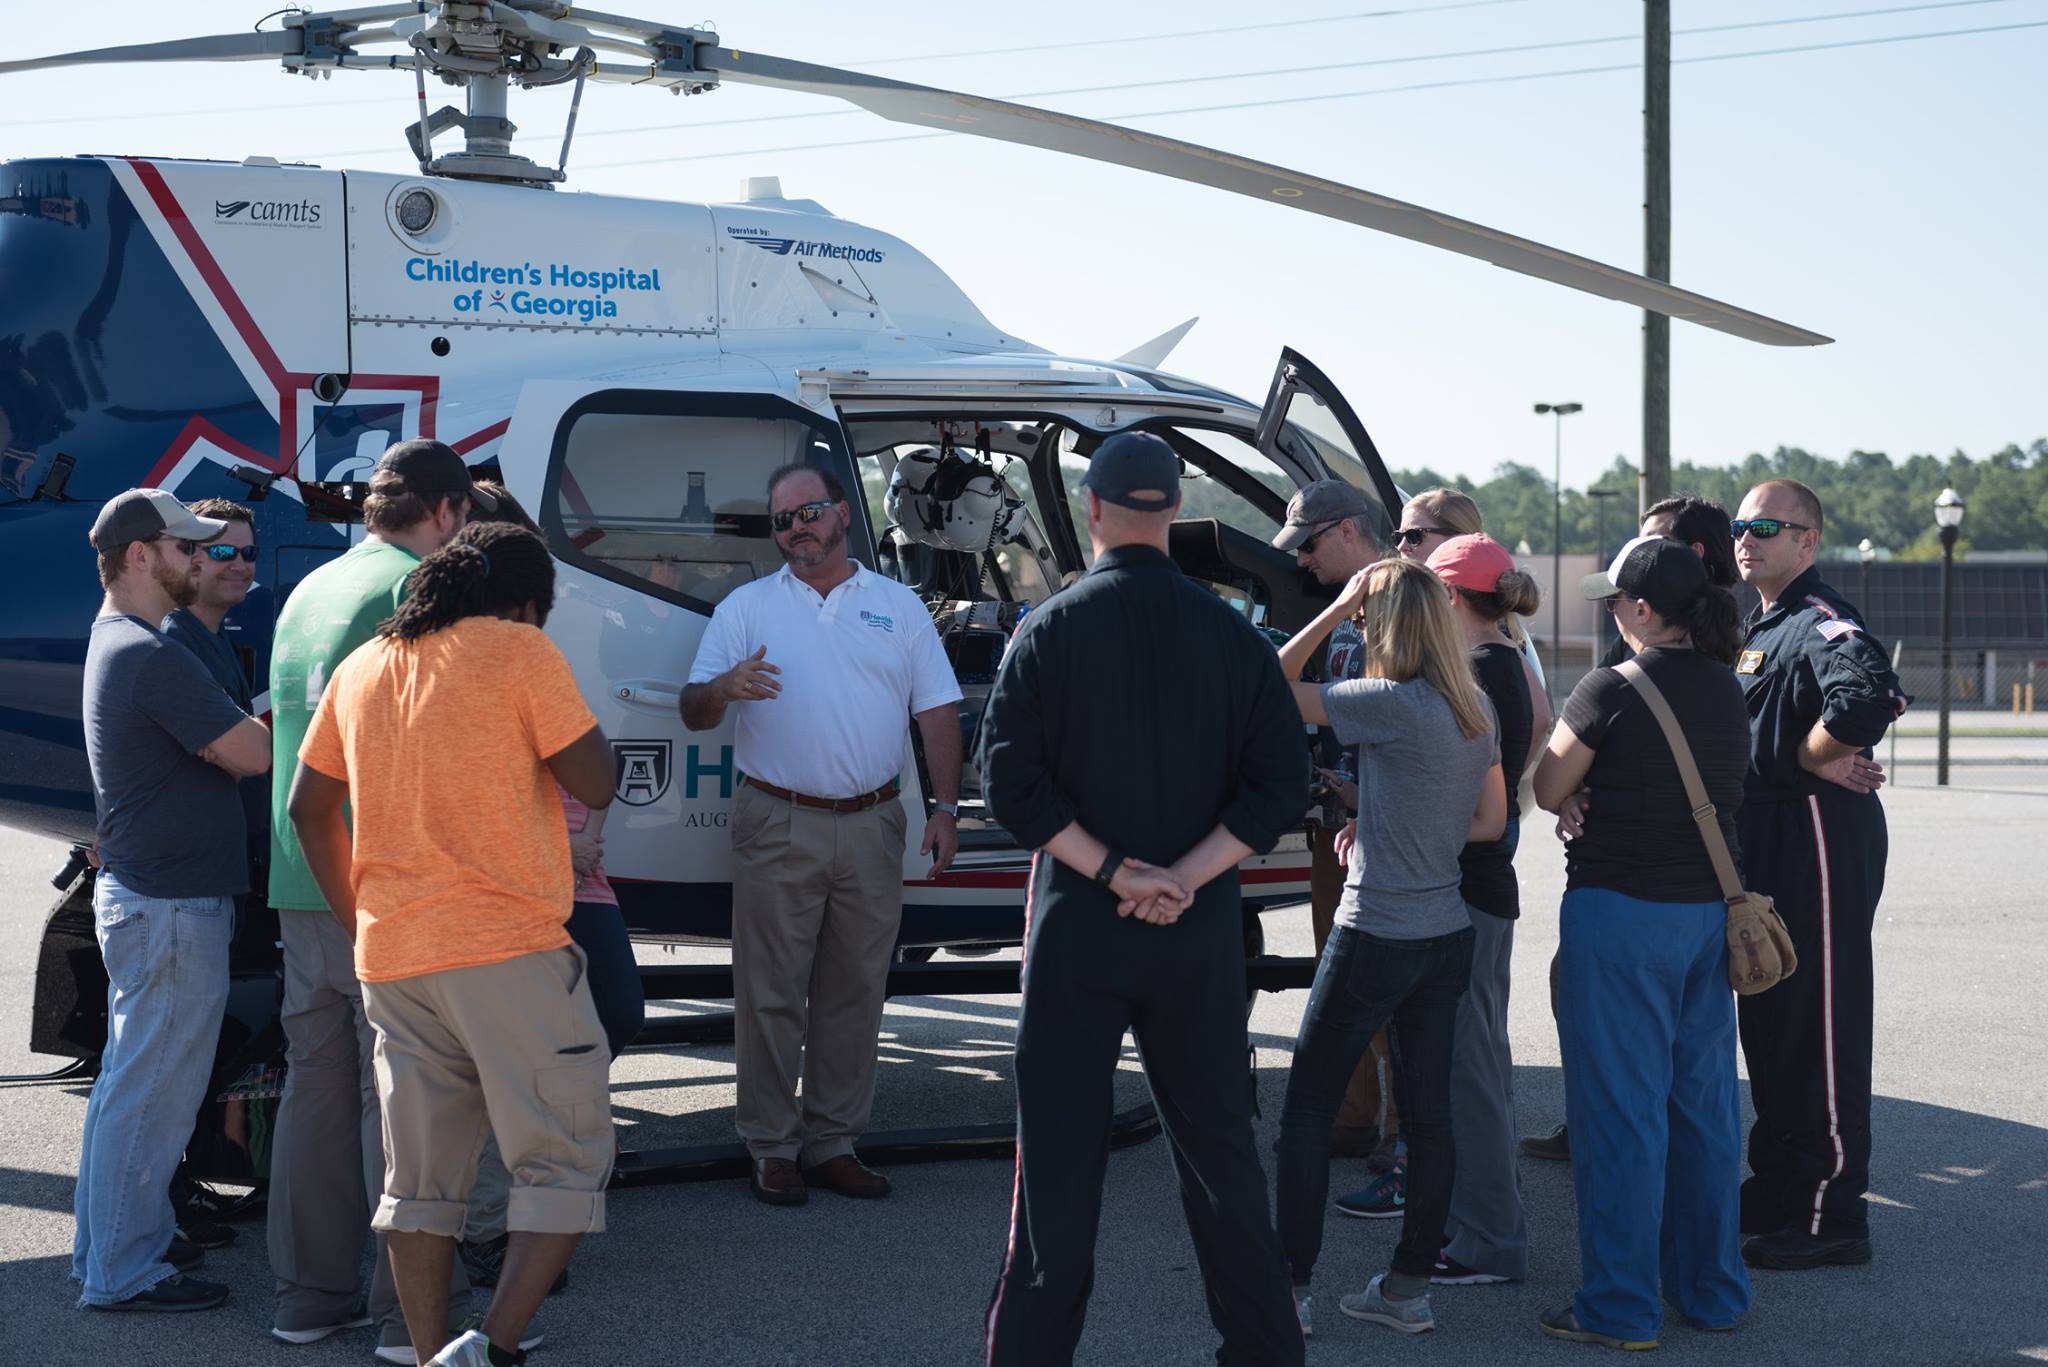 Dr. Phillip Coule explaining advantages and challenges of helicopter transport to residents.